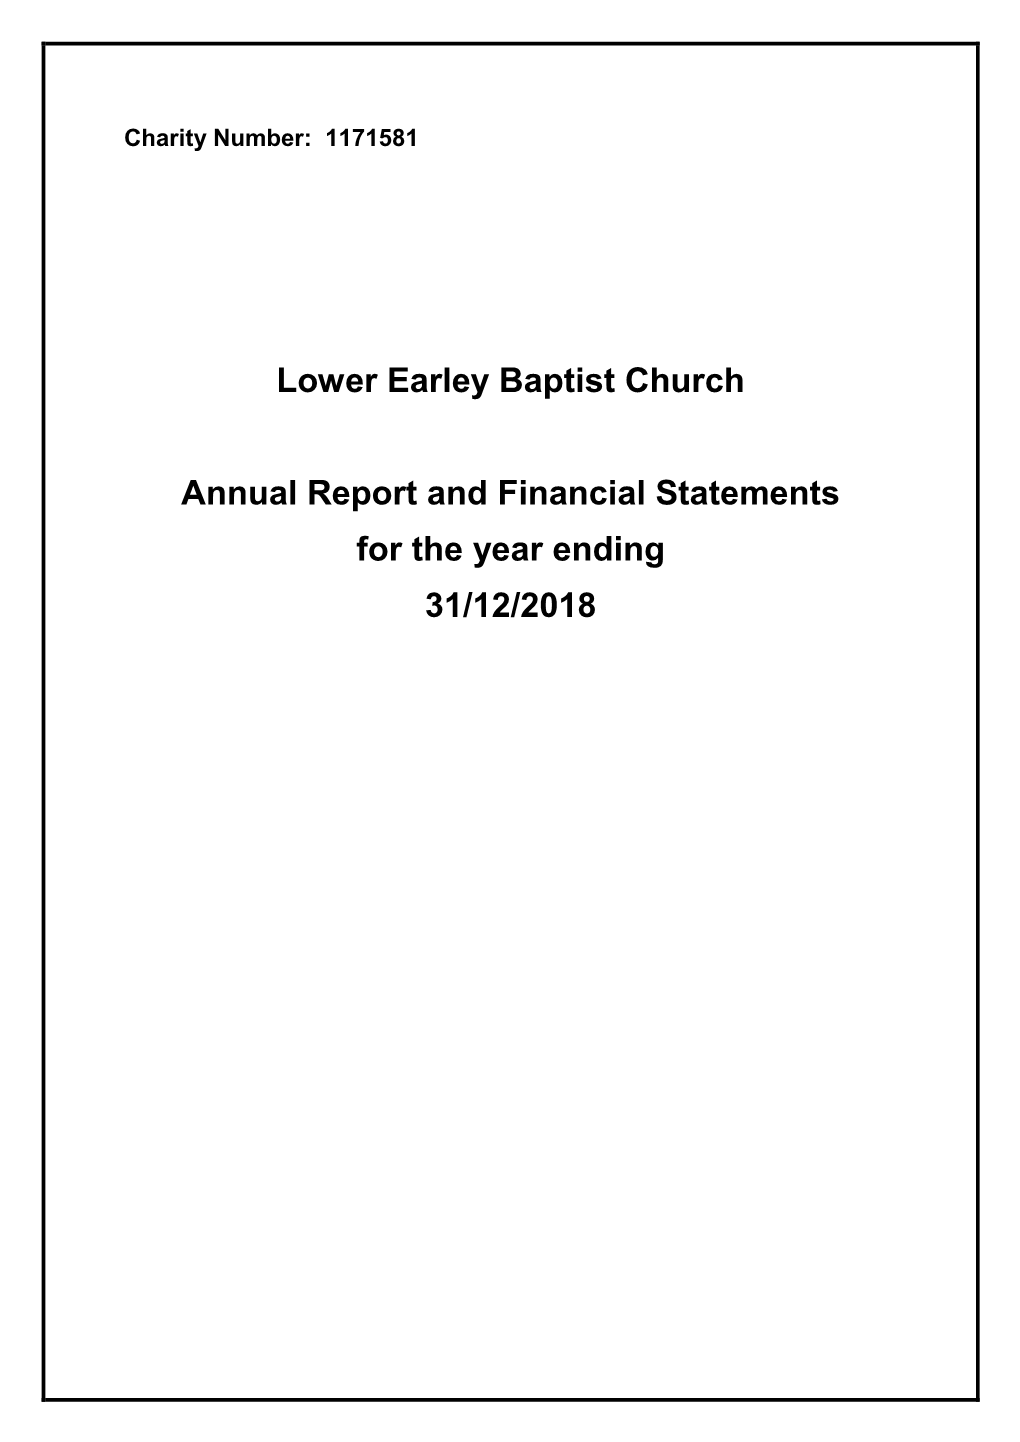 Lower Earley Baptist Church Annual Report and Financial Statements for the Year Ending 31/12/2018